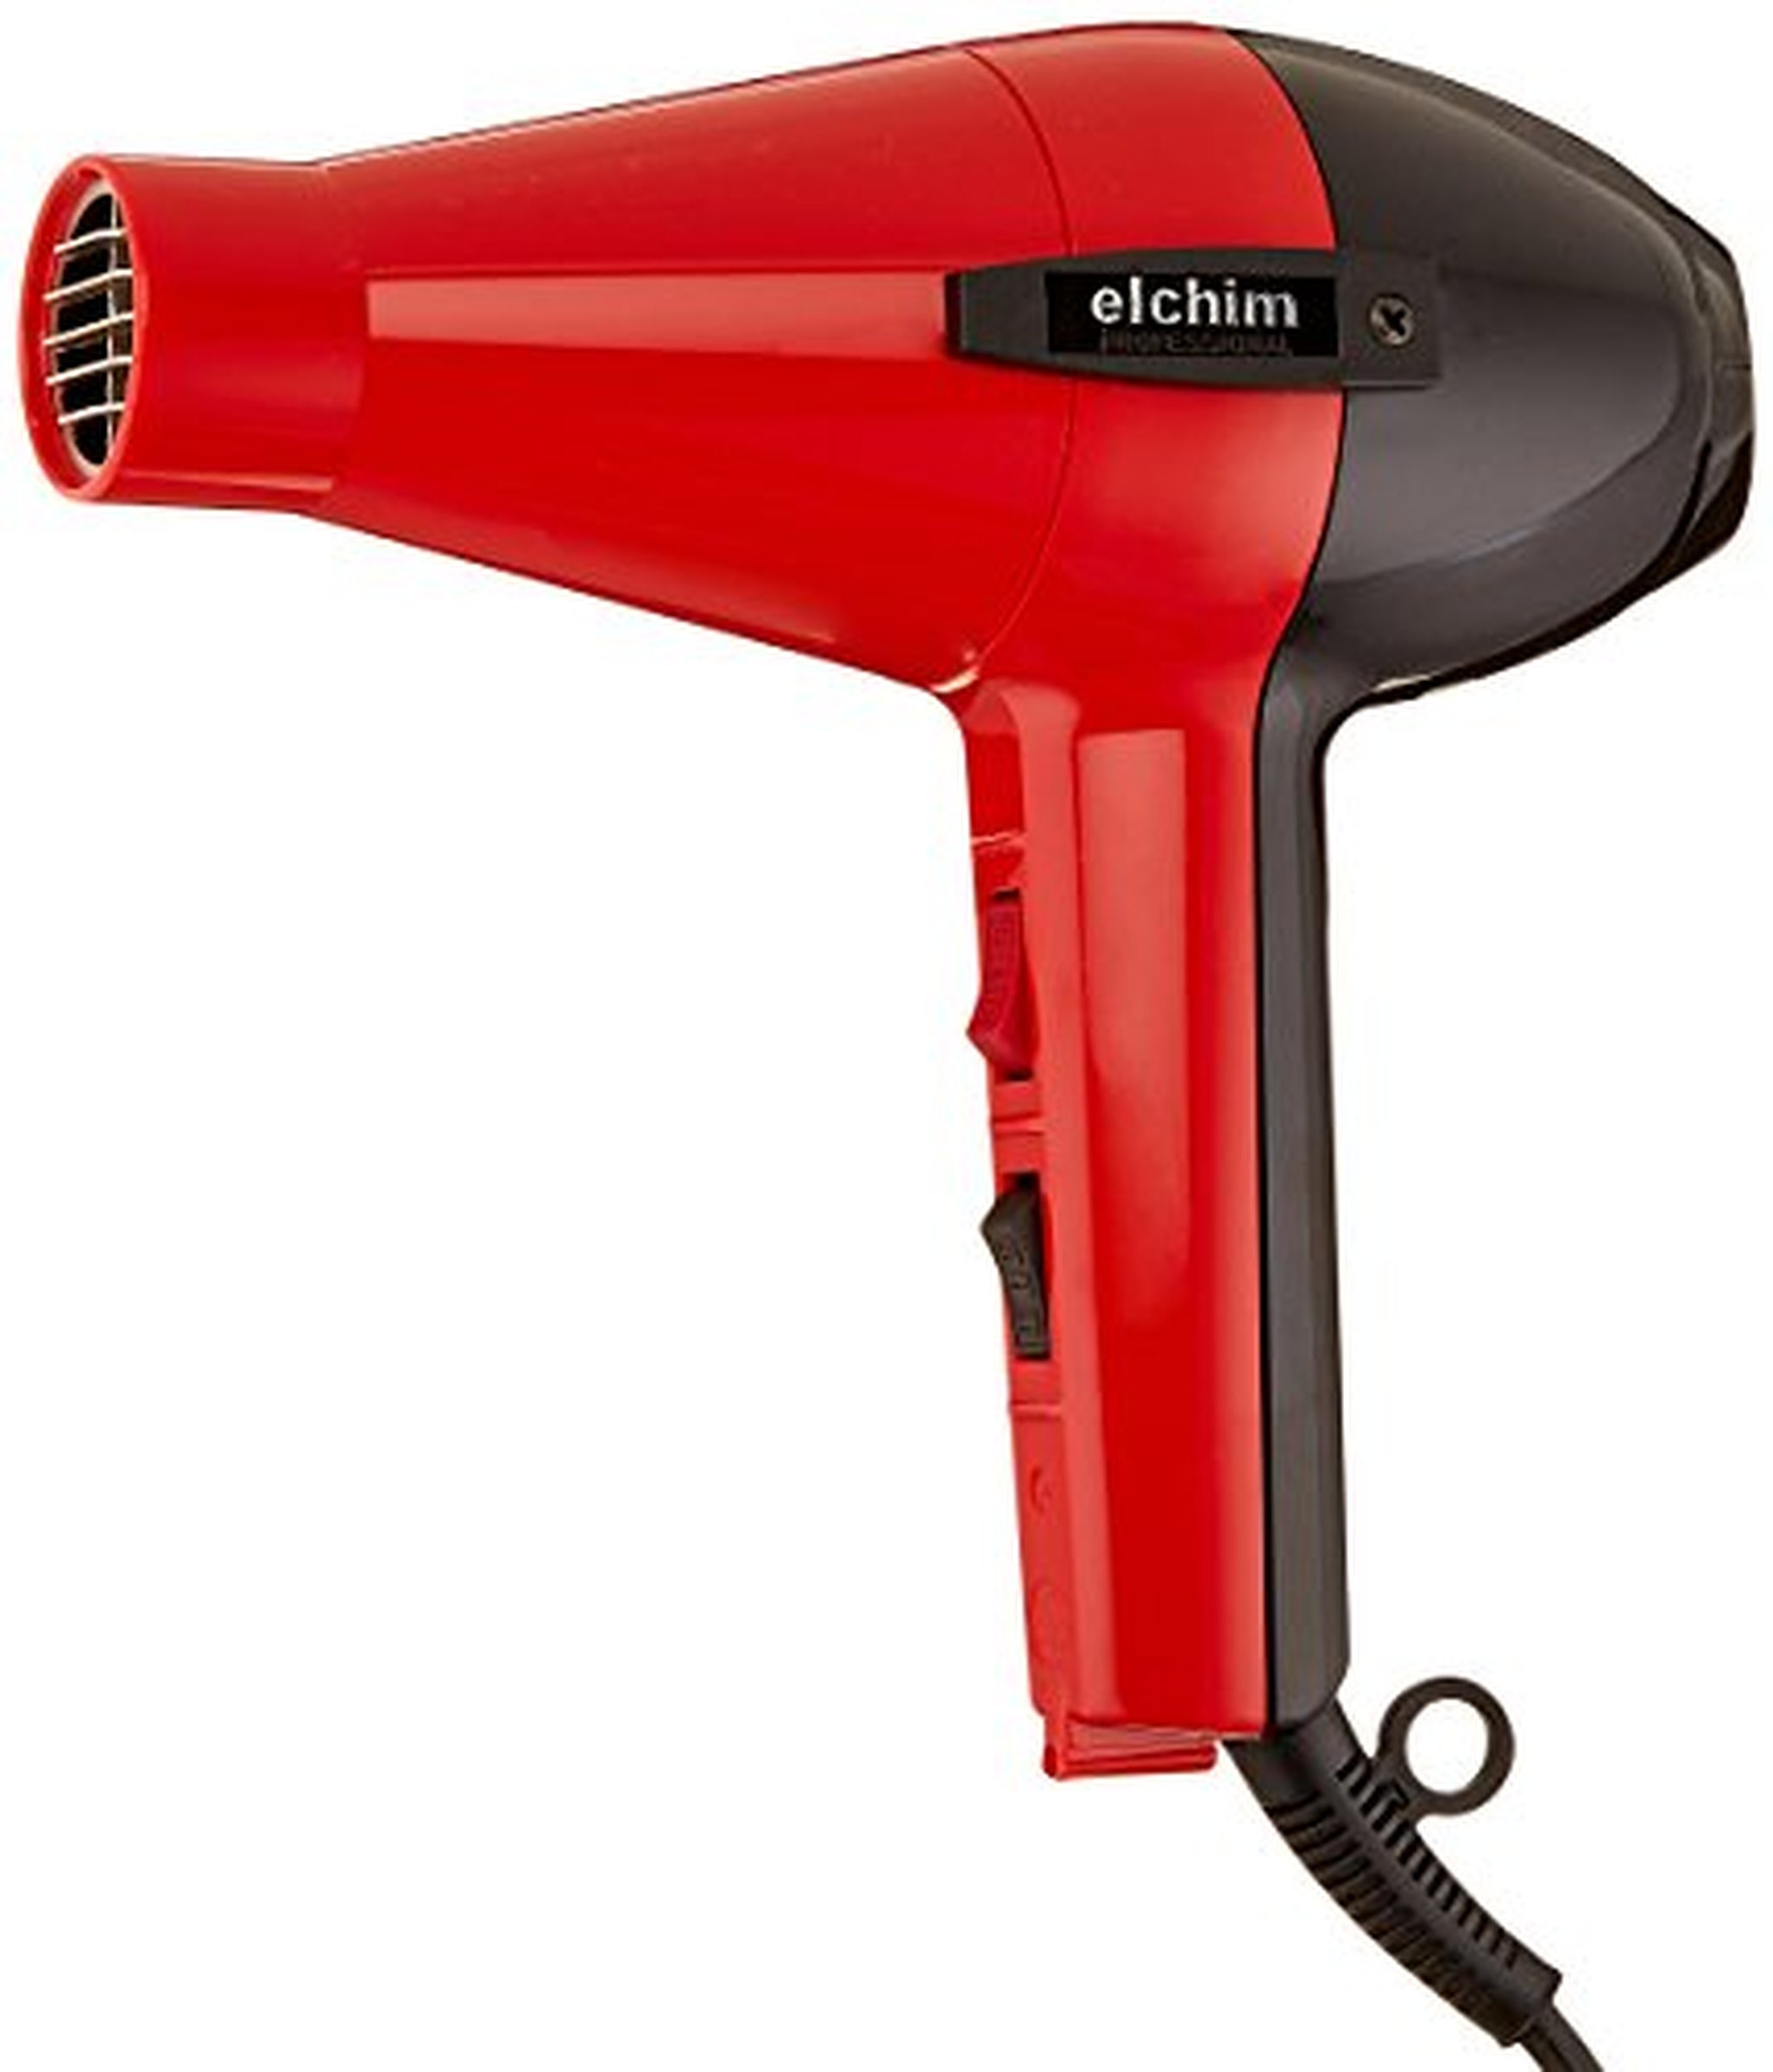 ParentsNeed | Top 5 Best Hair Dryers for Every Hair | 2016 Reviews